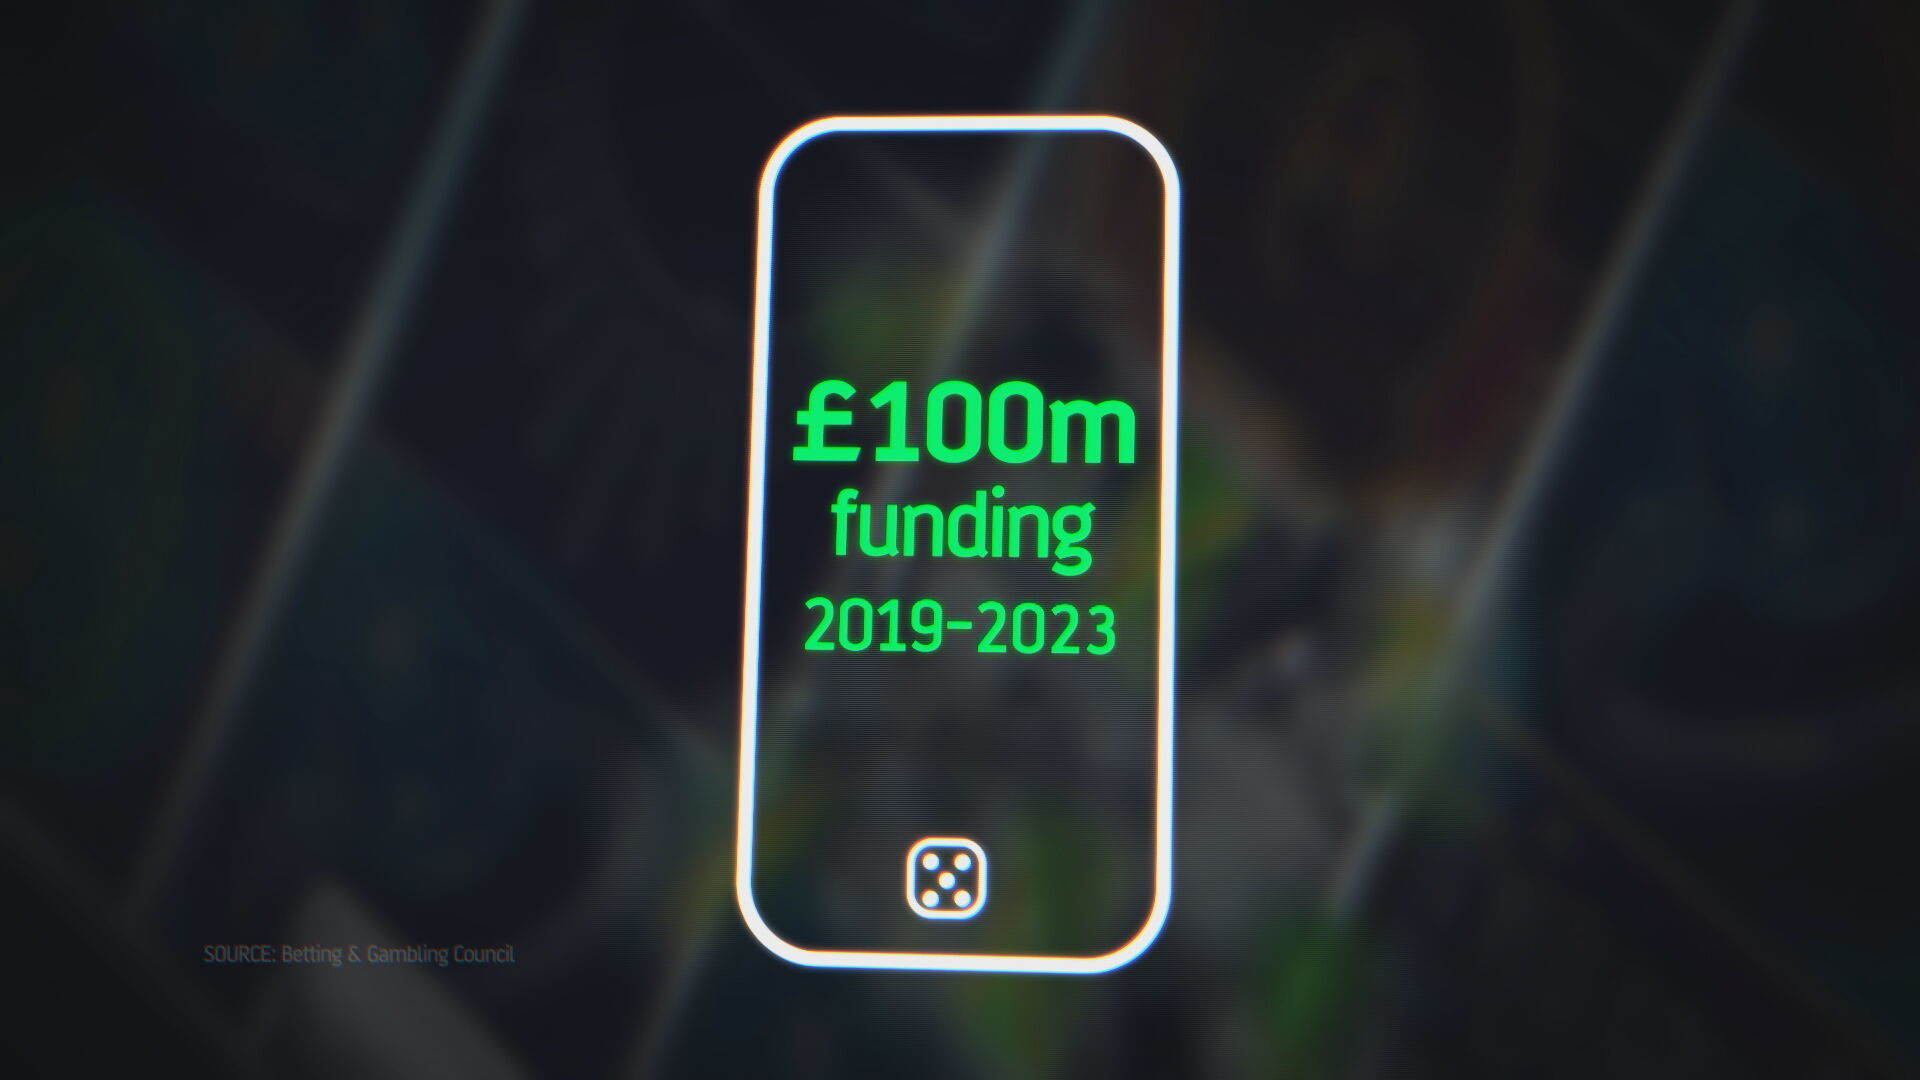 The Betting and Gaming council told STV News an additional £100m of funding had been pledged to tackle gambling harm.